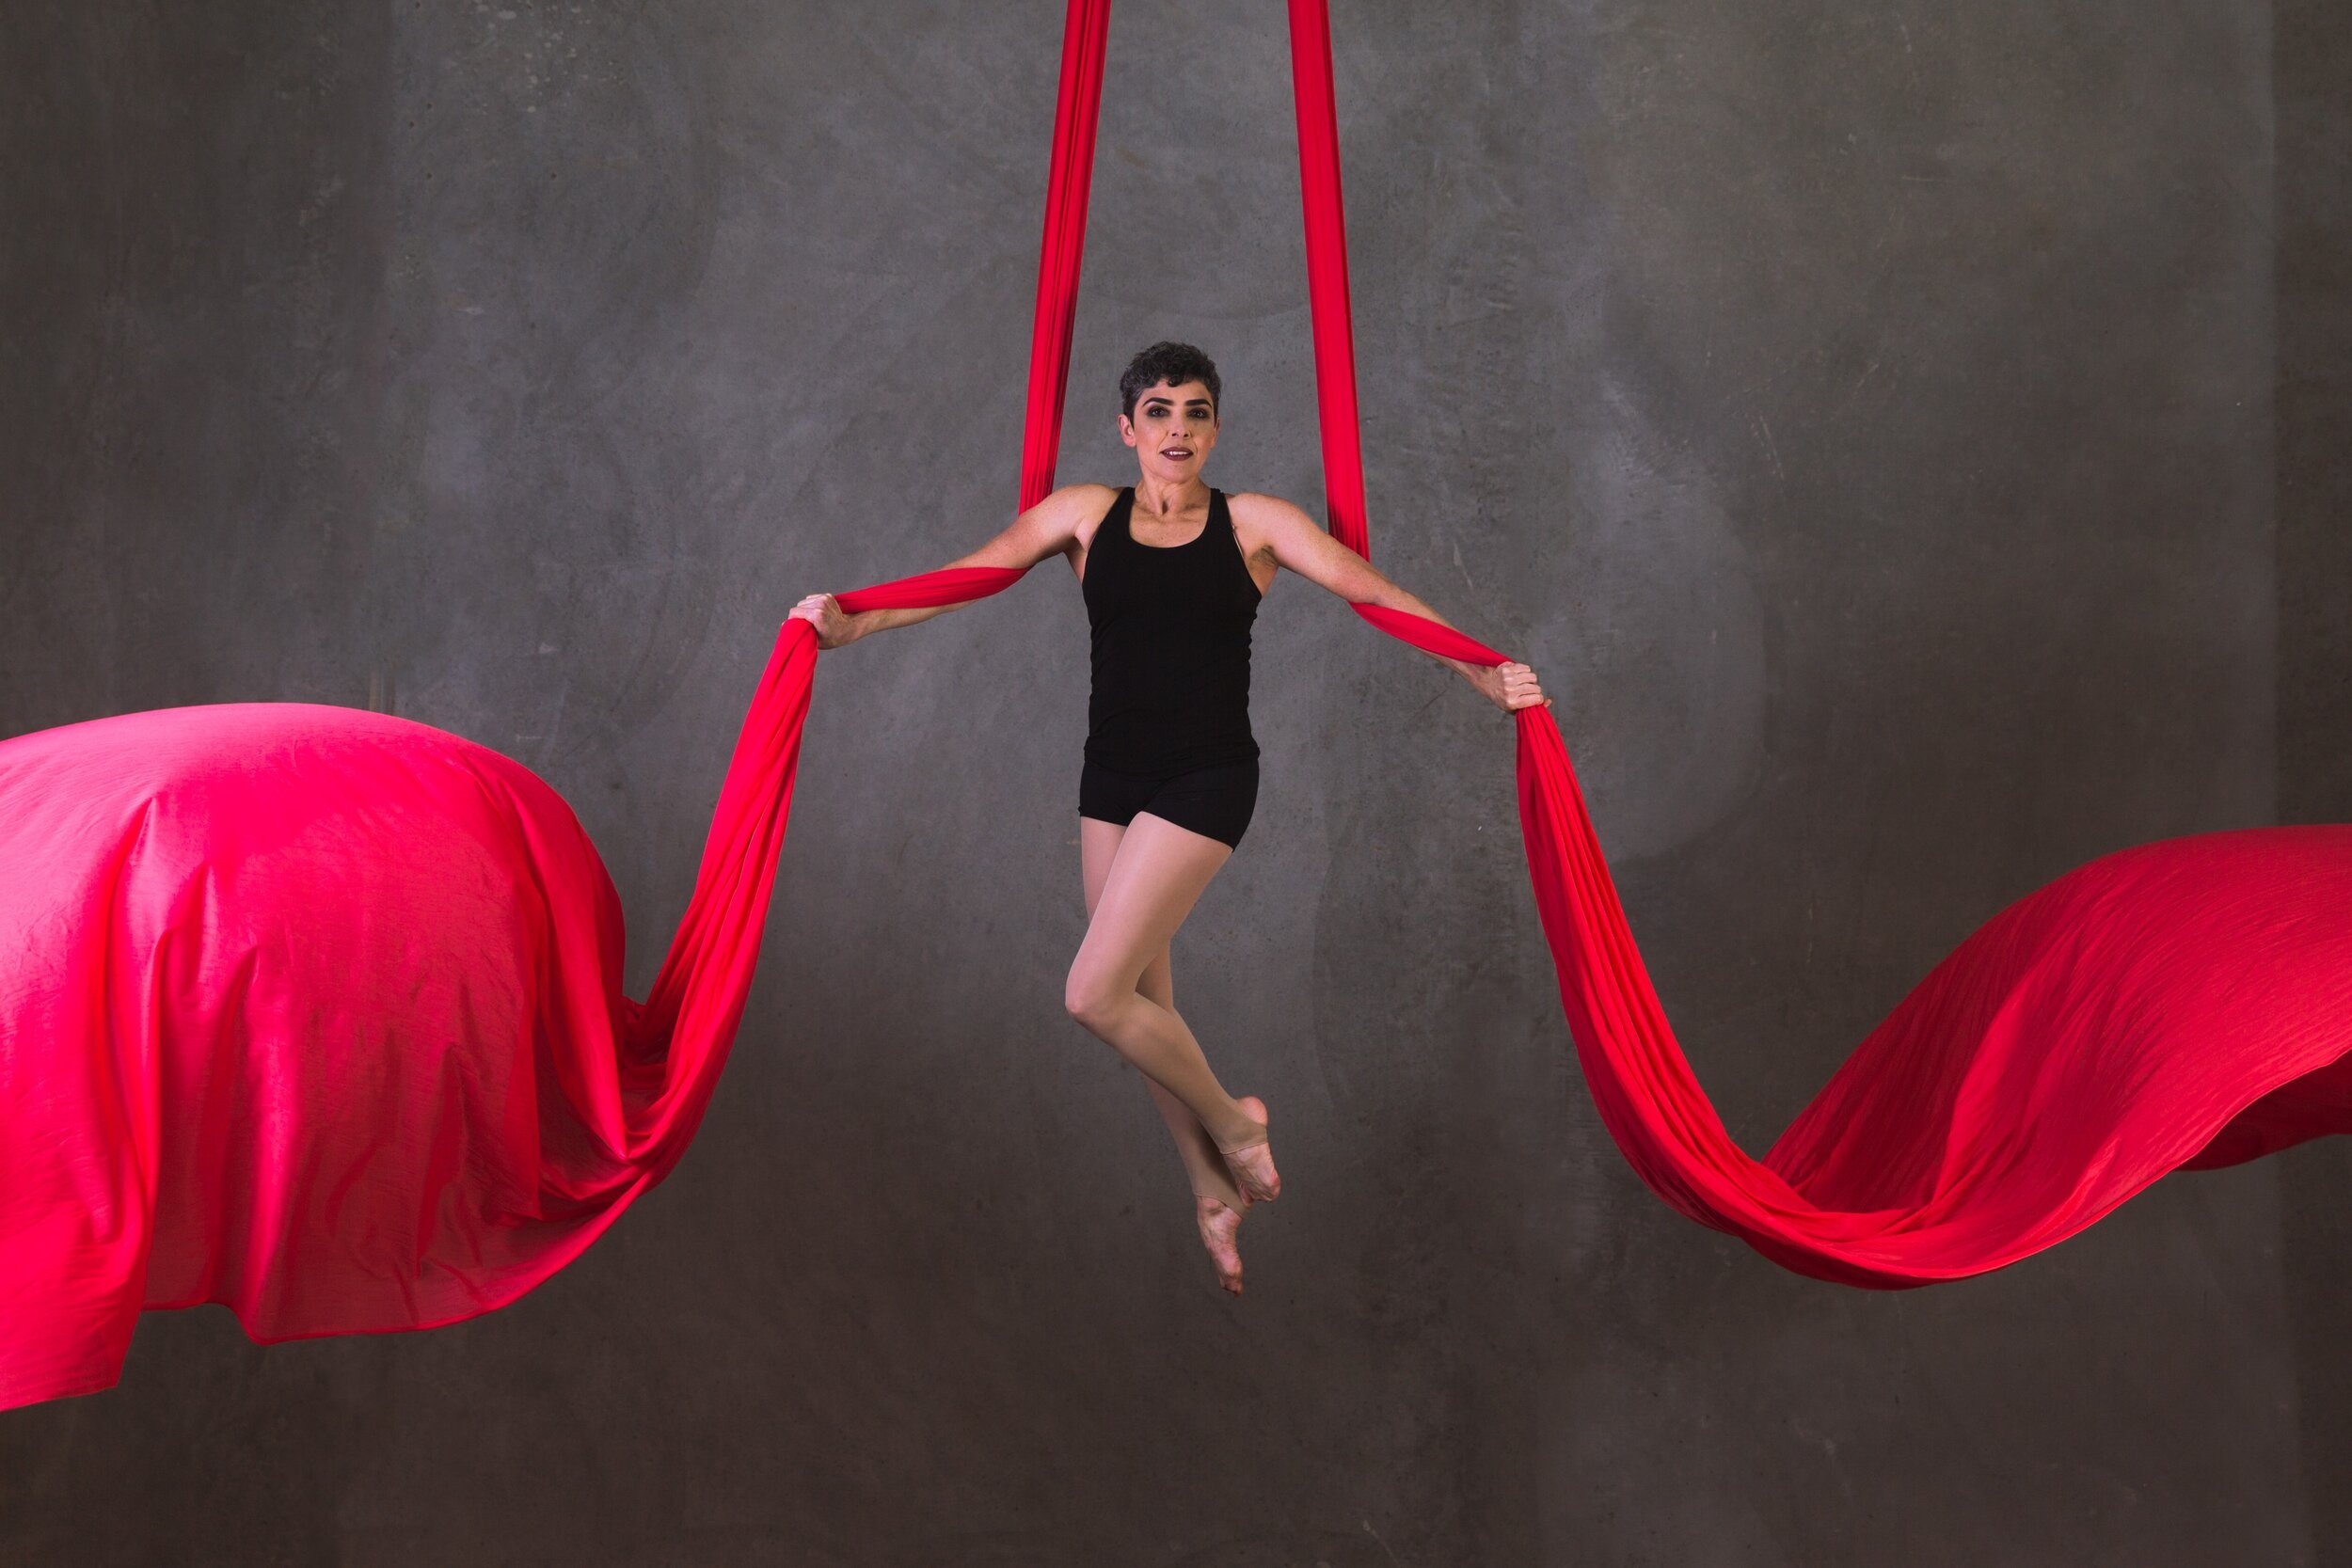 Aerial Silks: The red fabric used by a female aerialist during an artistic performance and training. 2500x1670 HD Wallpaper.